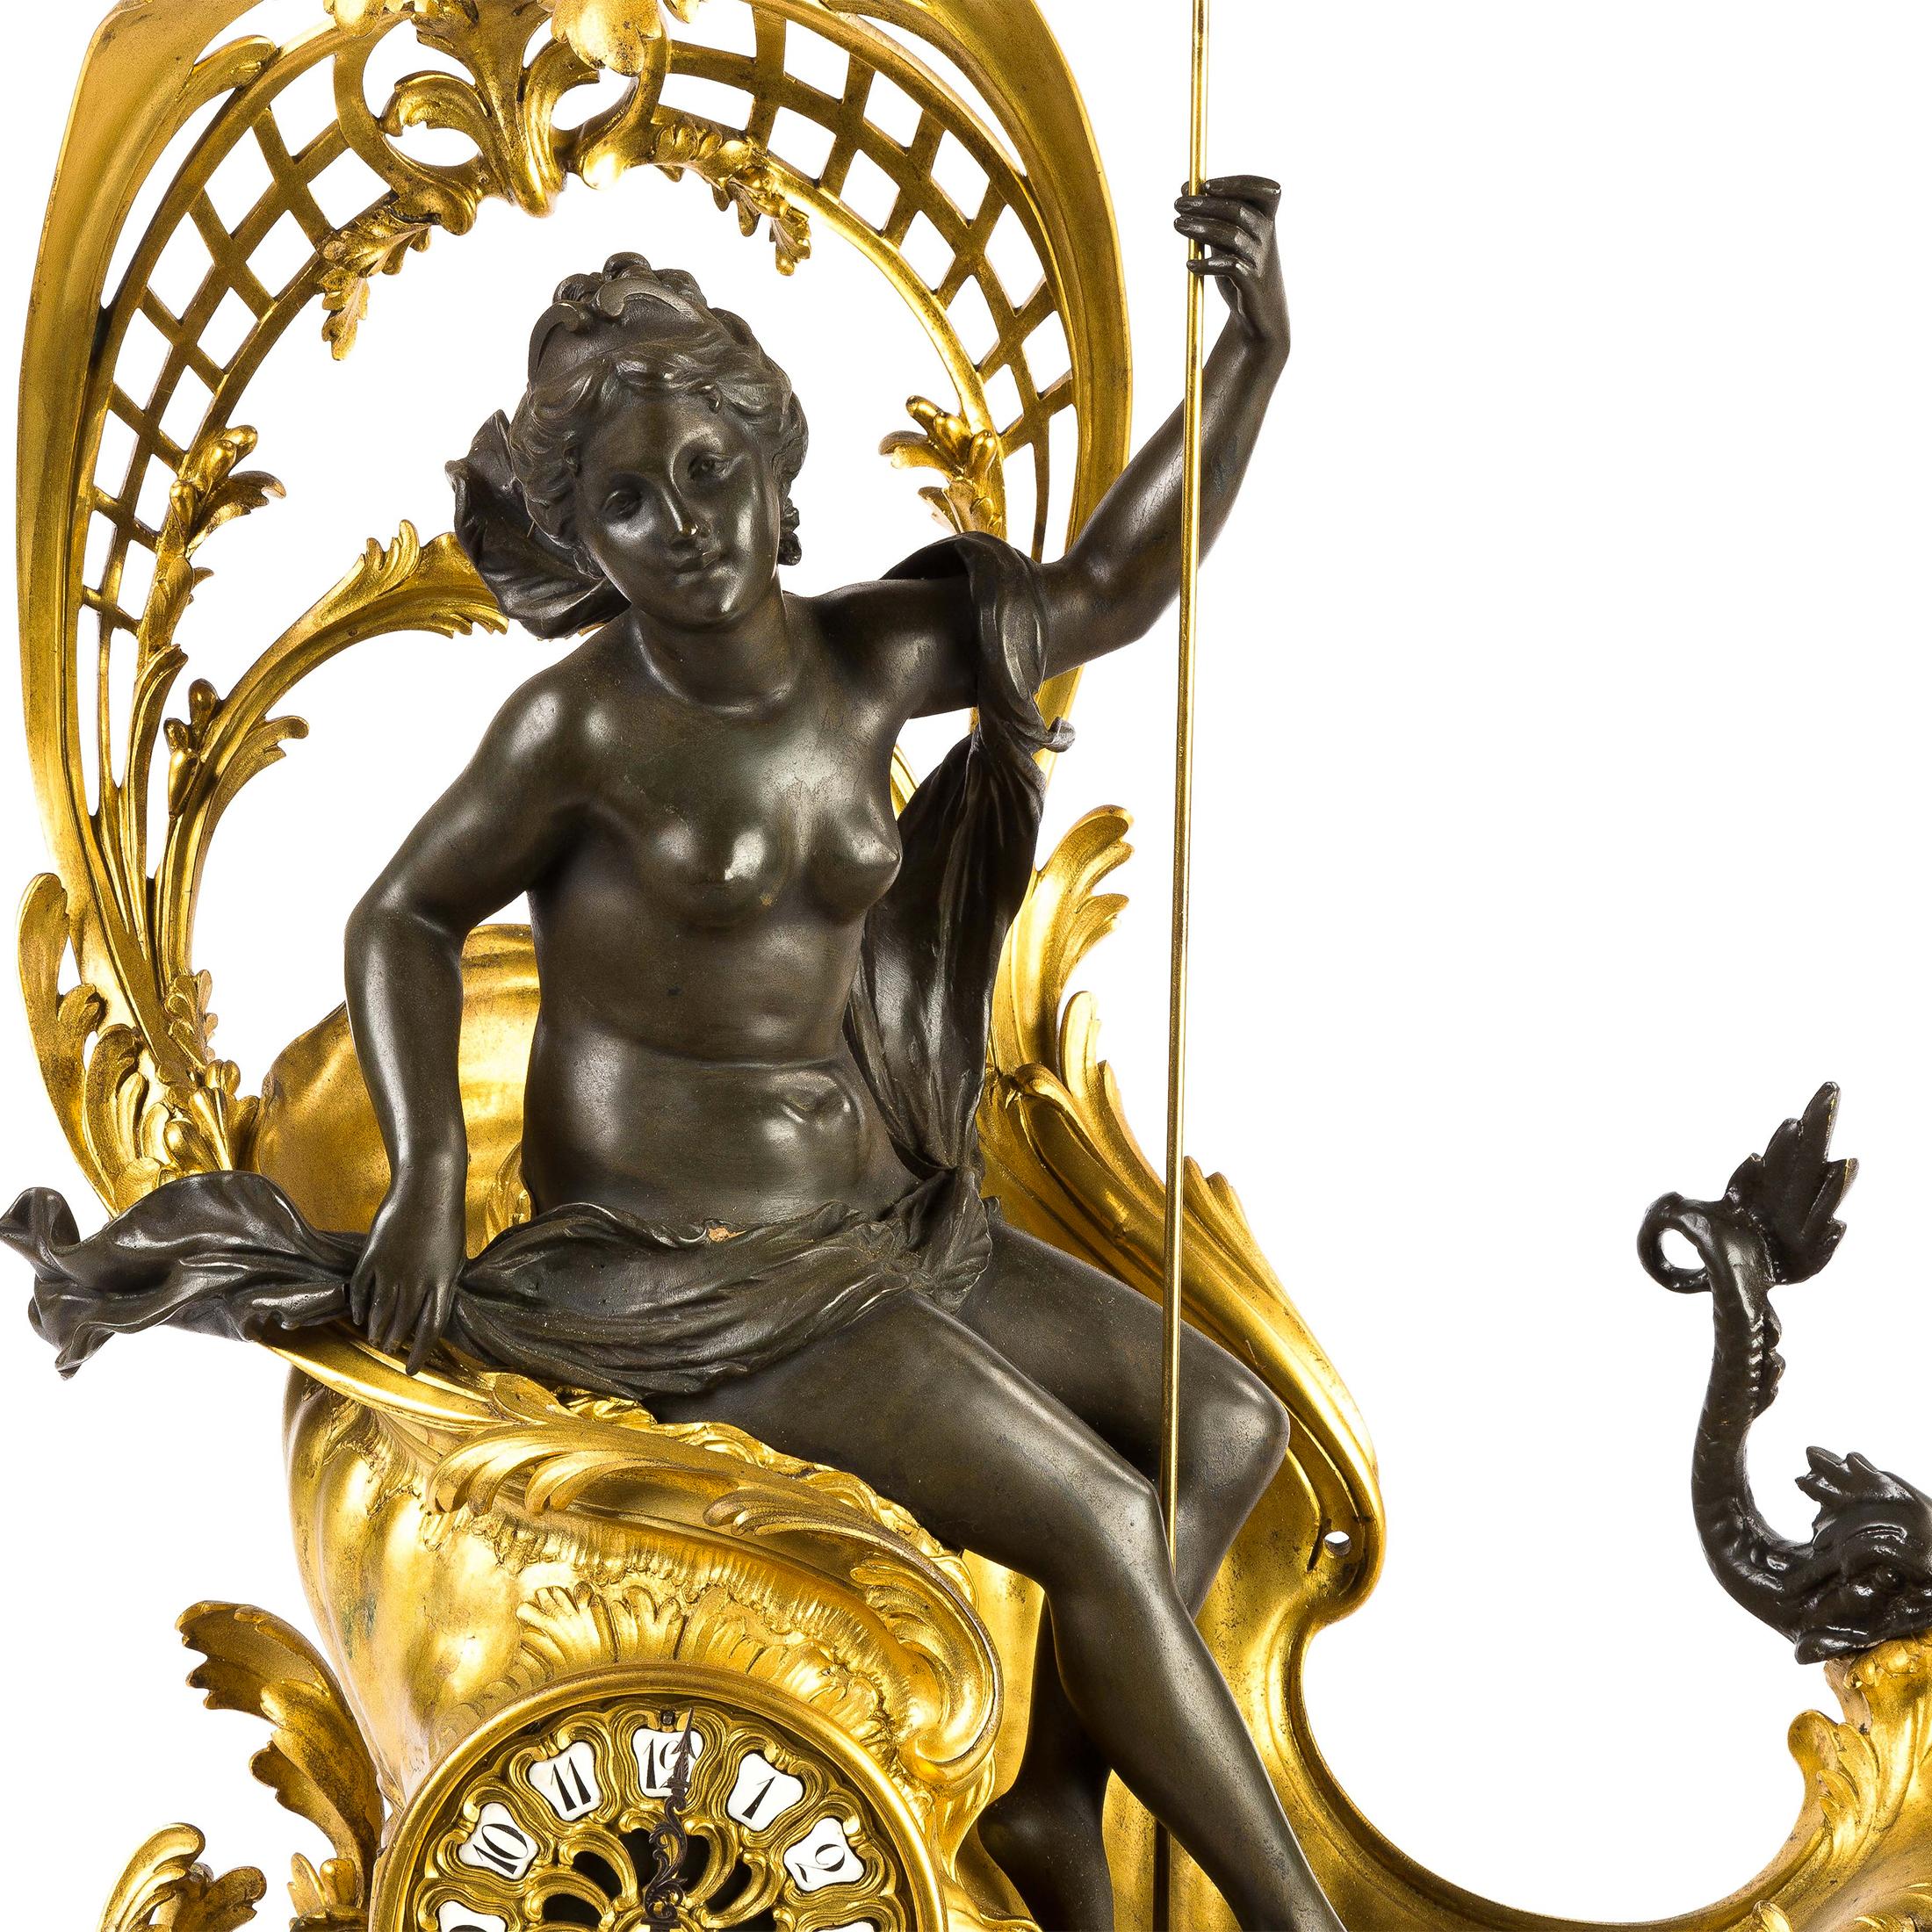 Gilt French Ormolu Figural Mantel Clock Depicting Amphitrite's Chariot For Sale